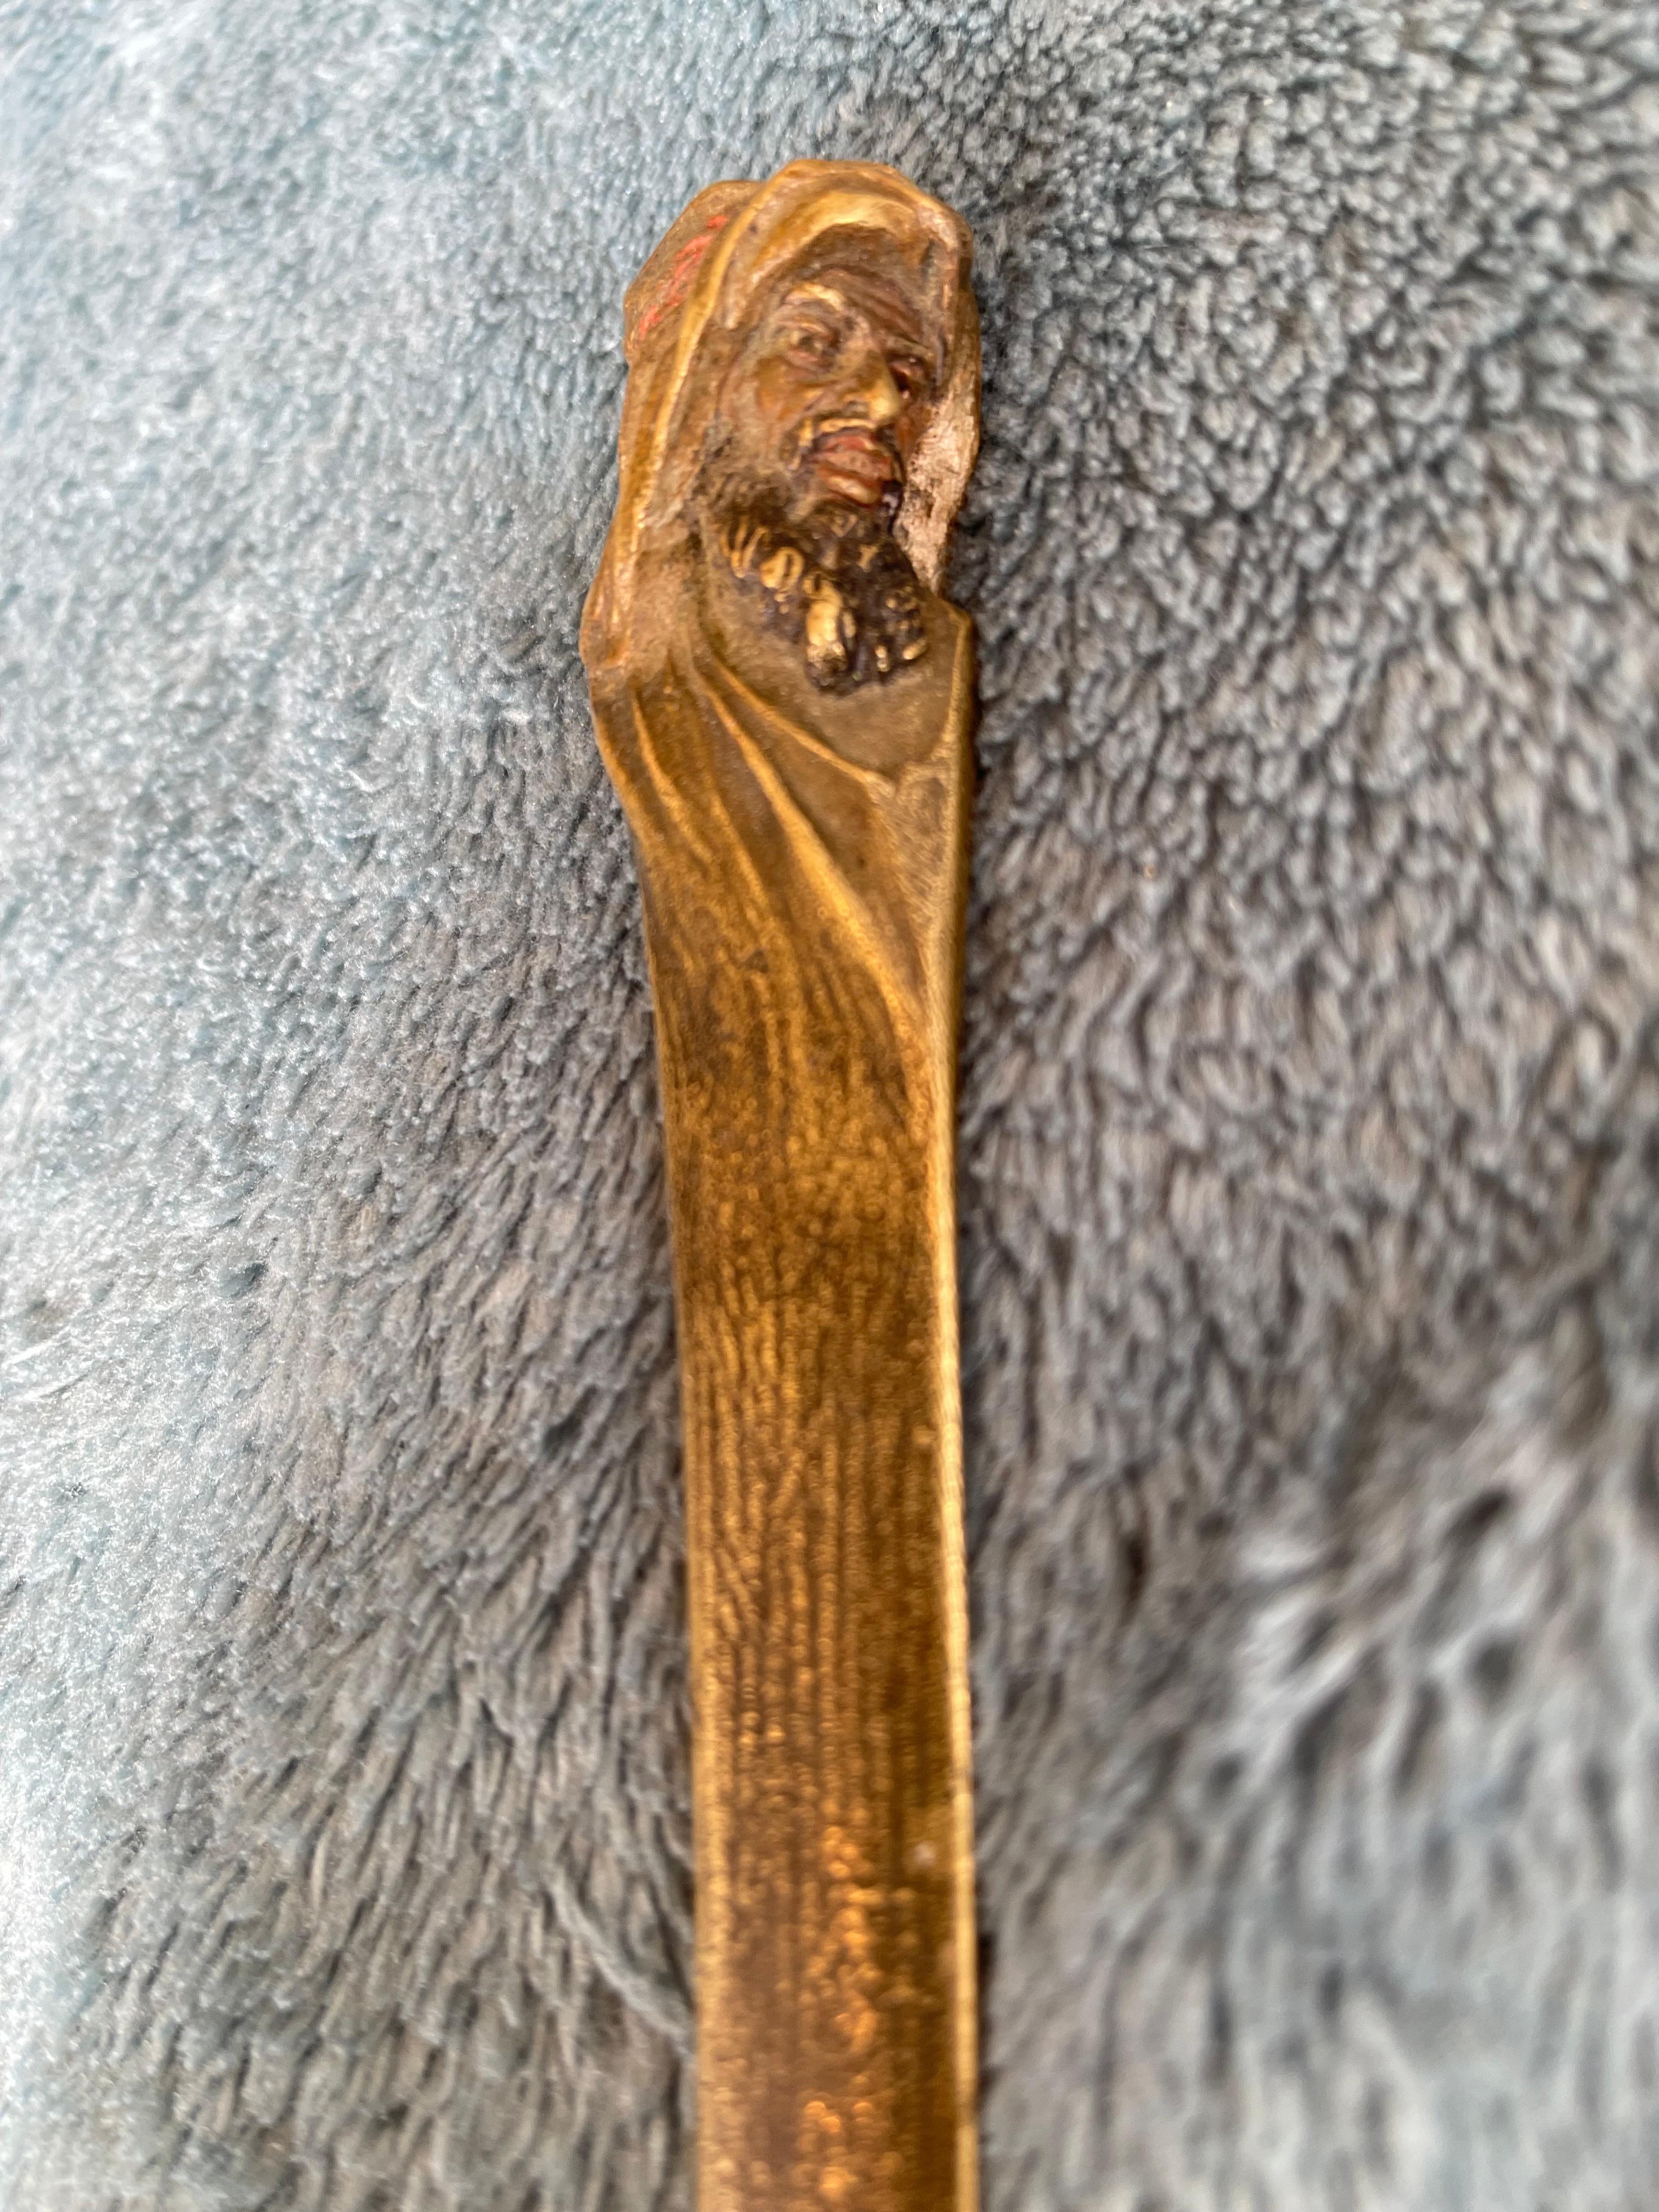  This letter opener, most likely done by the Bergmann Foundry is extremely rare. We have sold countless inkwells, bookends, lamps and other accessories for the desk, but the letter opener just never shows up. The man's face is nicely cast at the top